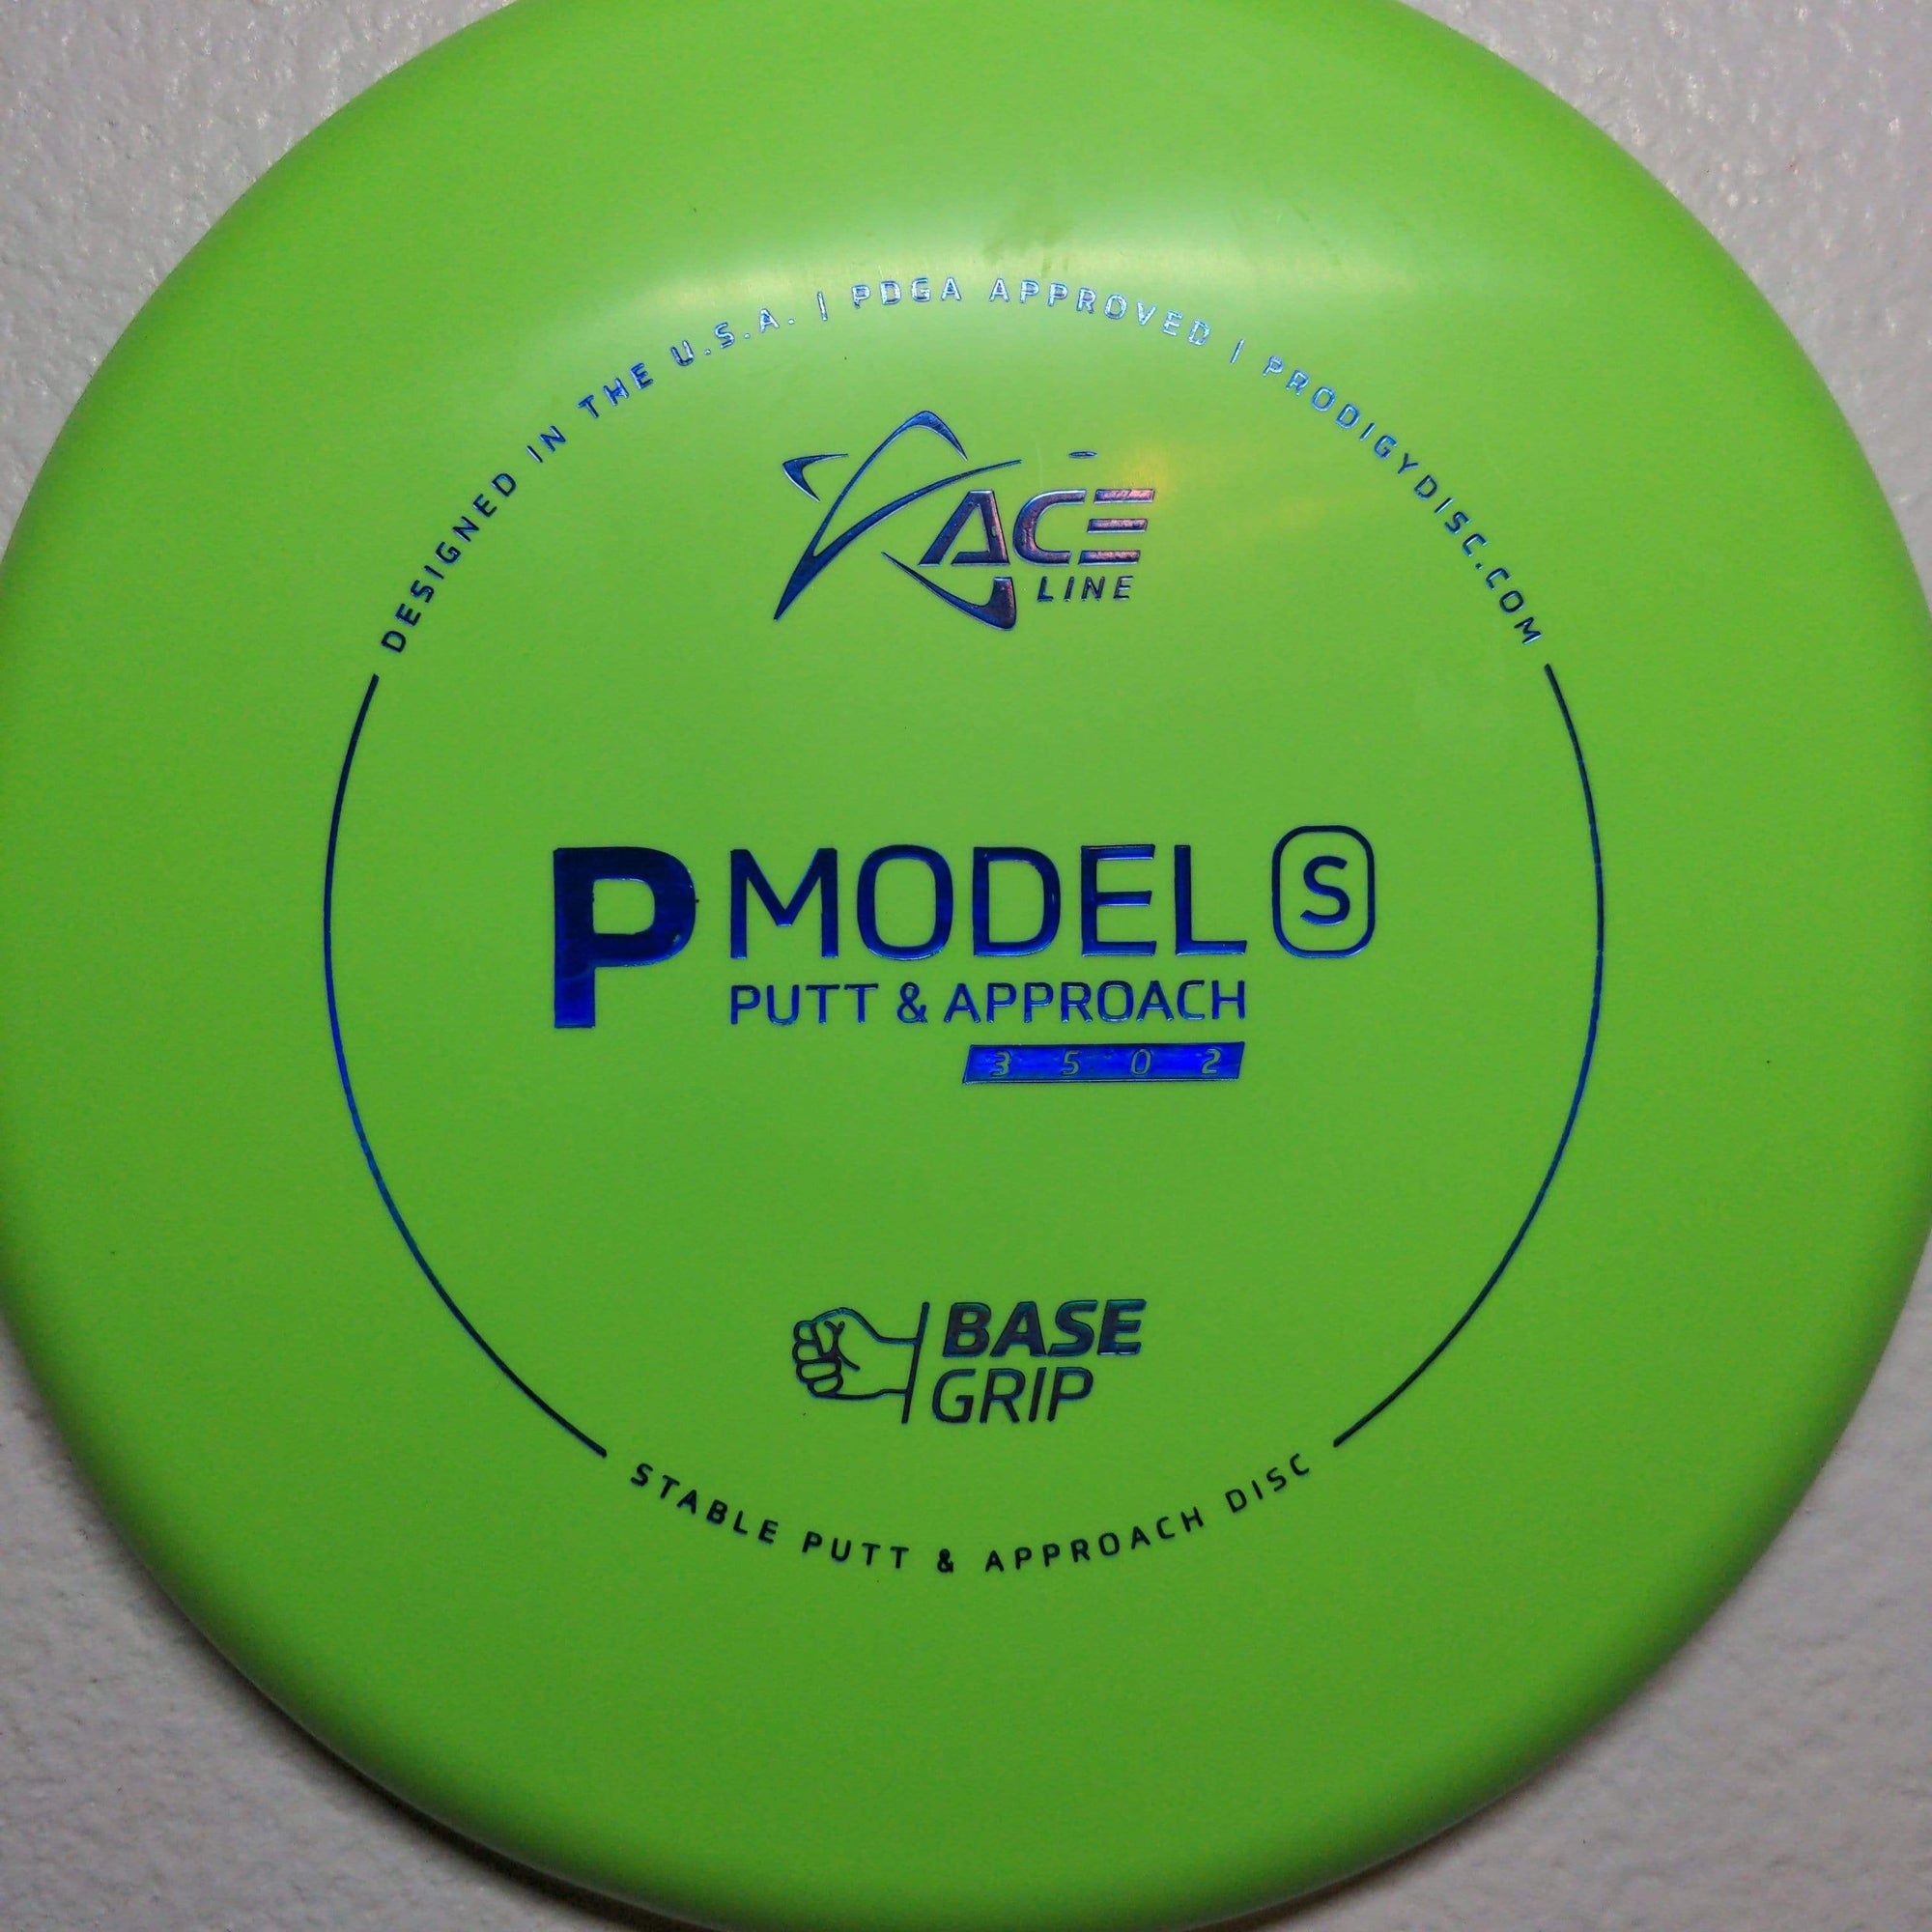 Prodigy Putter Lime Green 173g Ace Line P Model S, BaseGrip